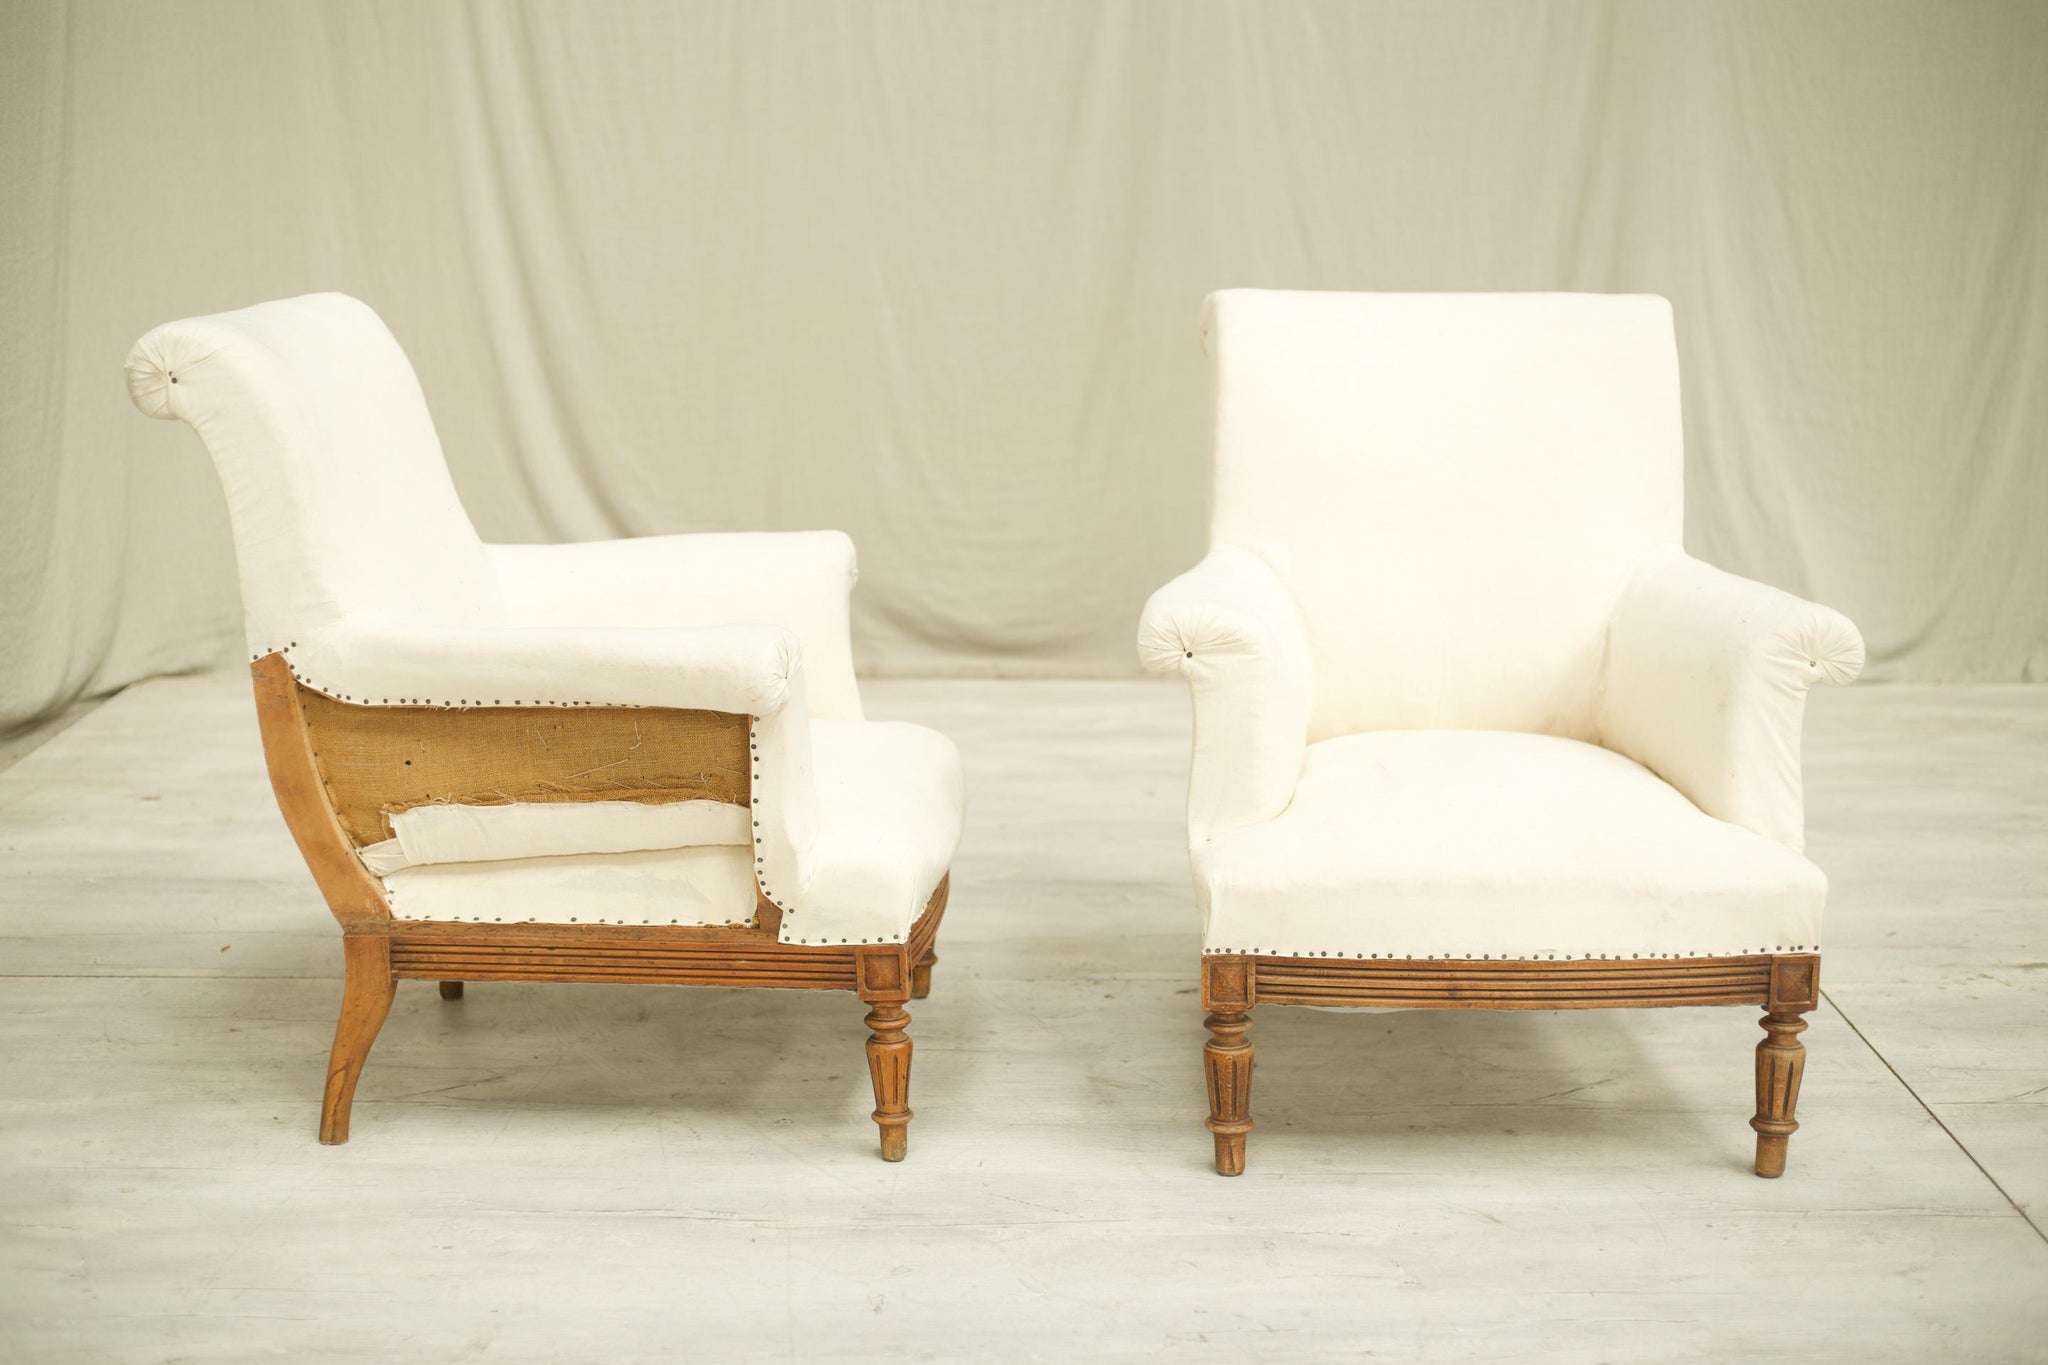 Antique Pair of early 20th century French scroll back armchairs